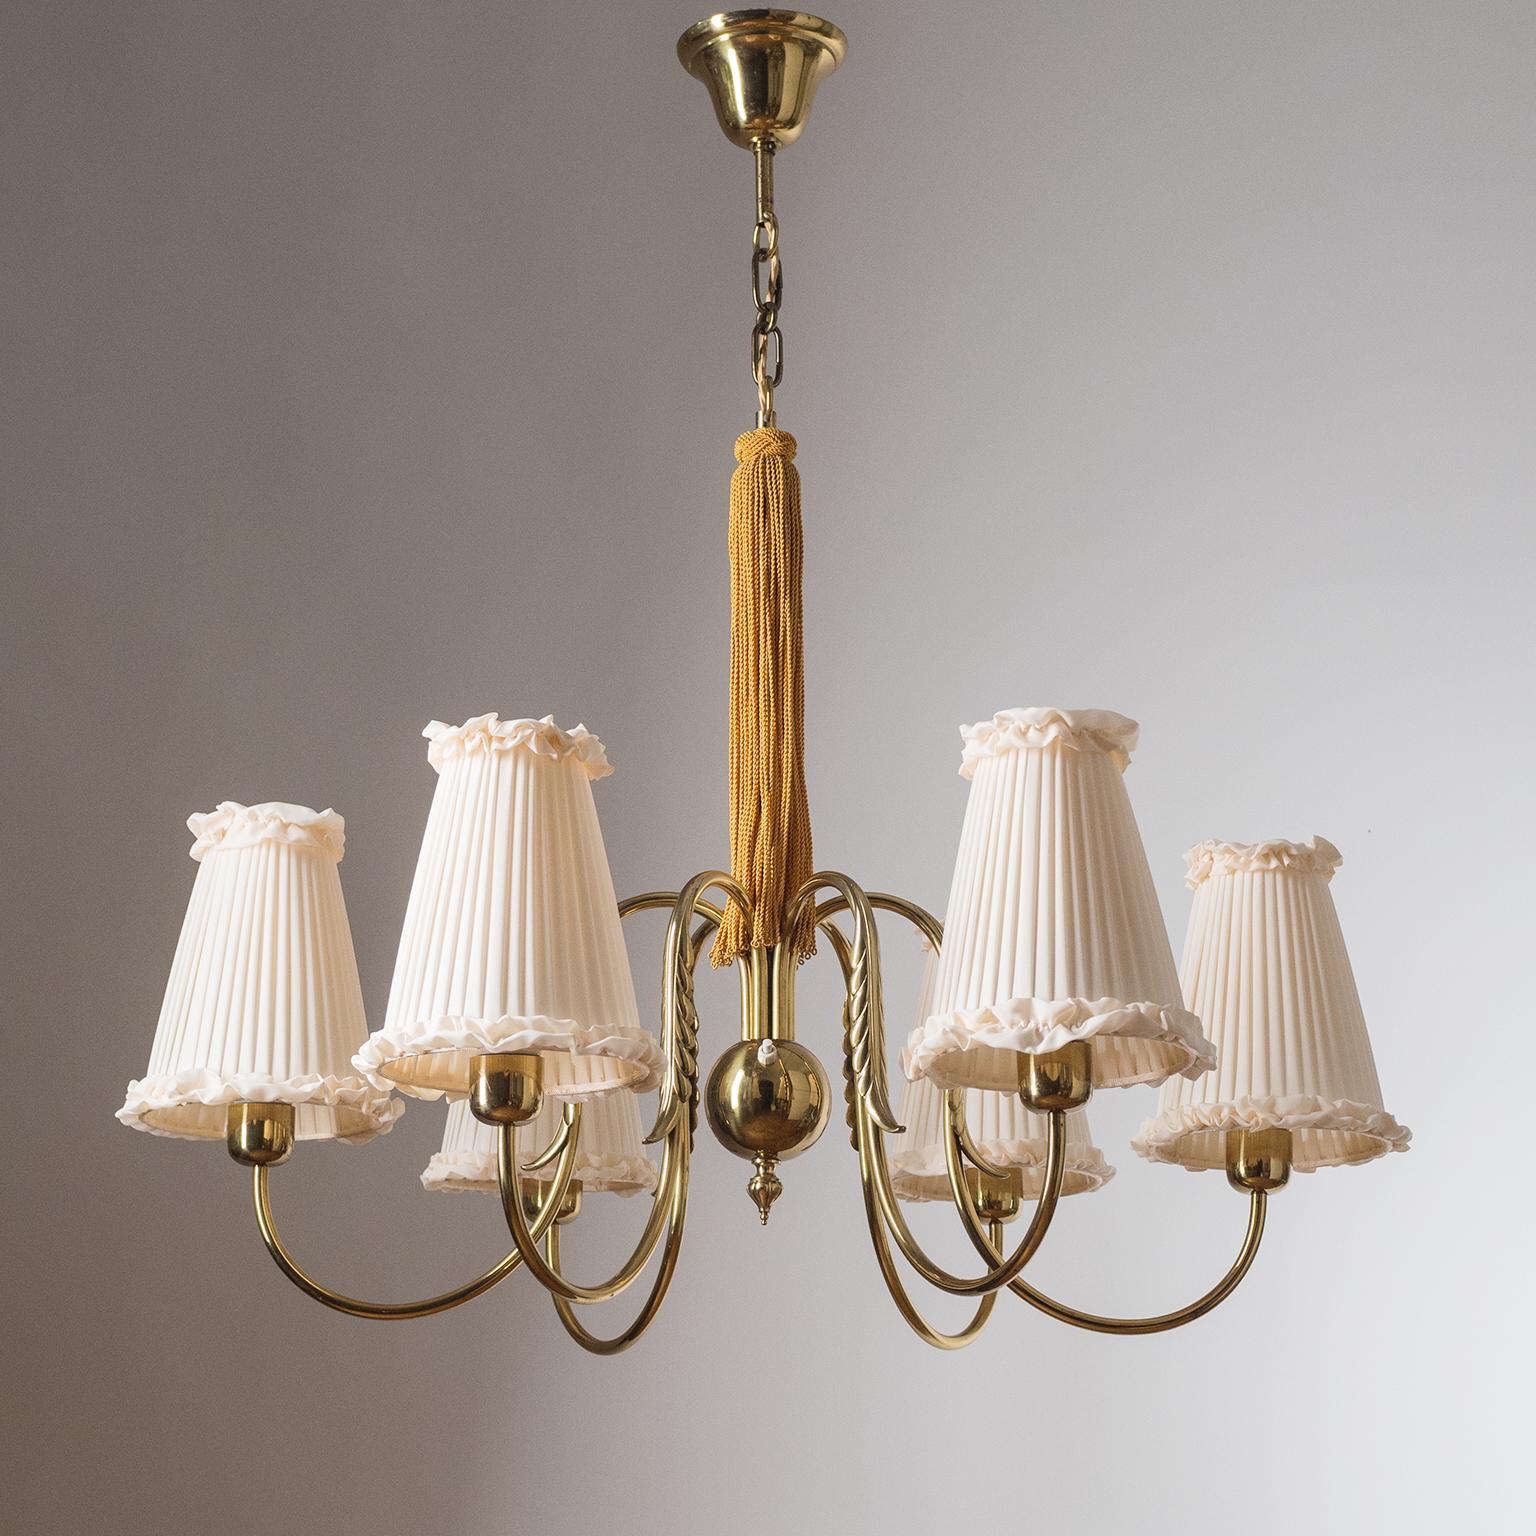 Rare Austrian 1930s brass chandelier, attributed to J.T. Kalmar. Six brass arms elegantly 'curve out' from a central brass ball and are decorated with cast brass leaf elements. Very good original condition with new custom shades. Six original brass